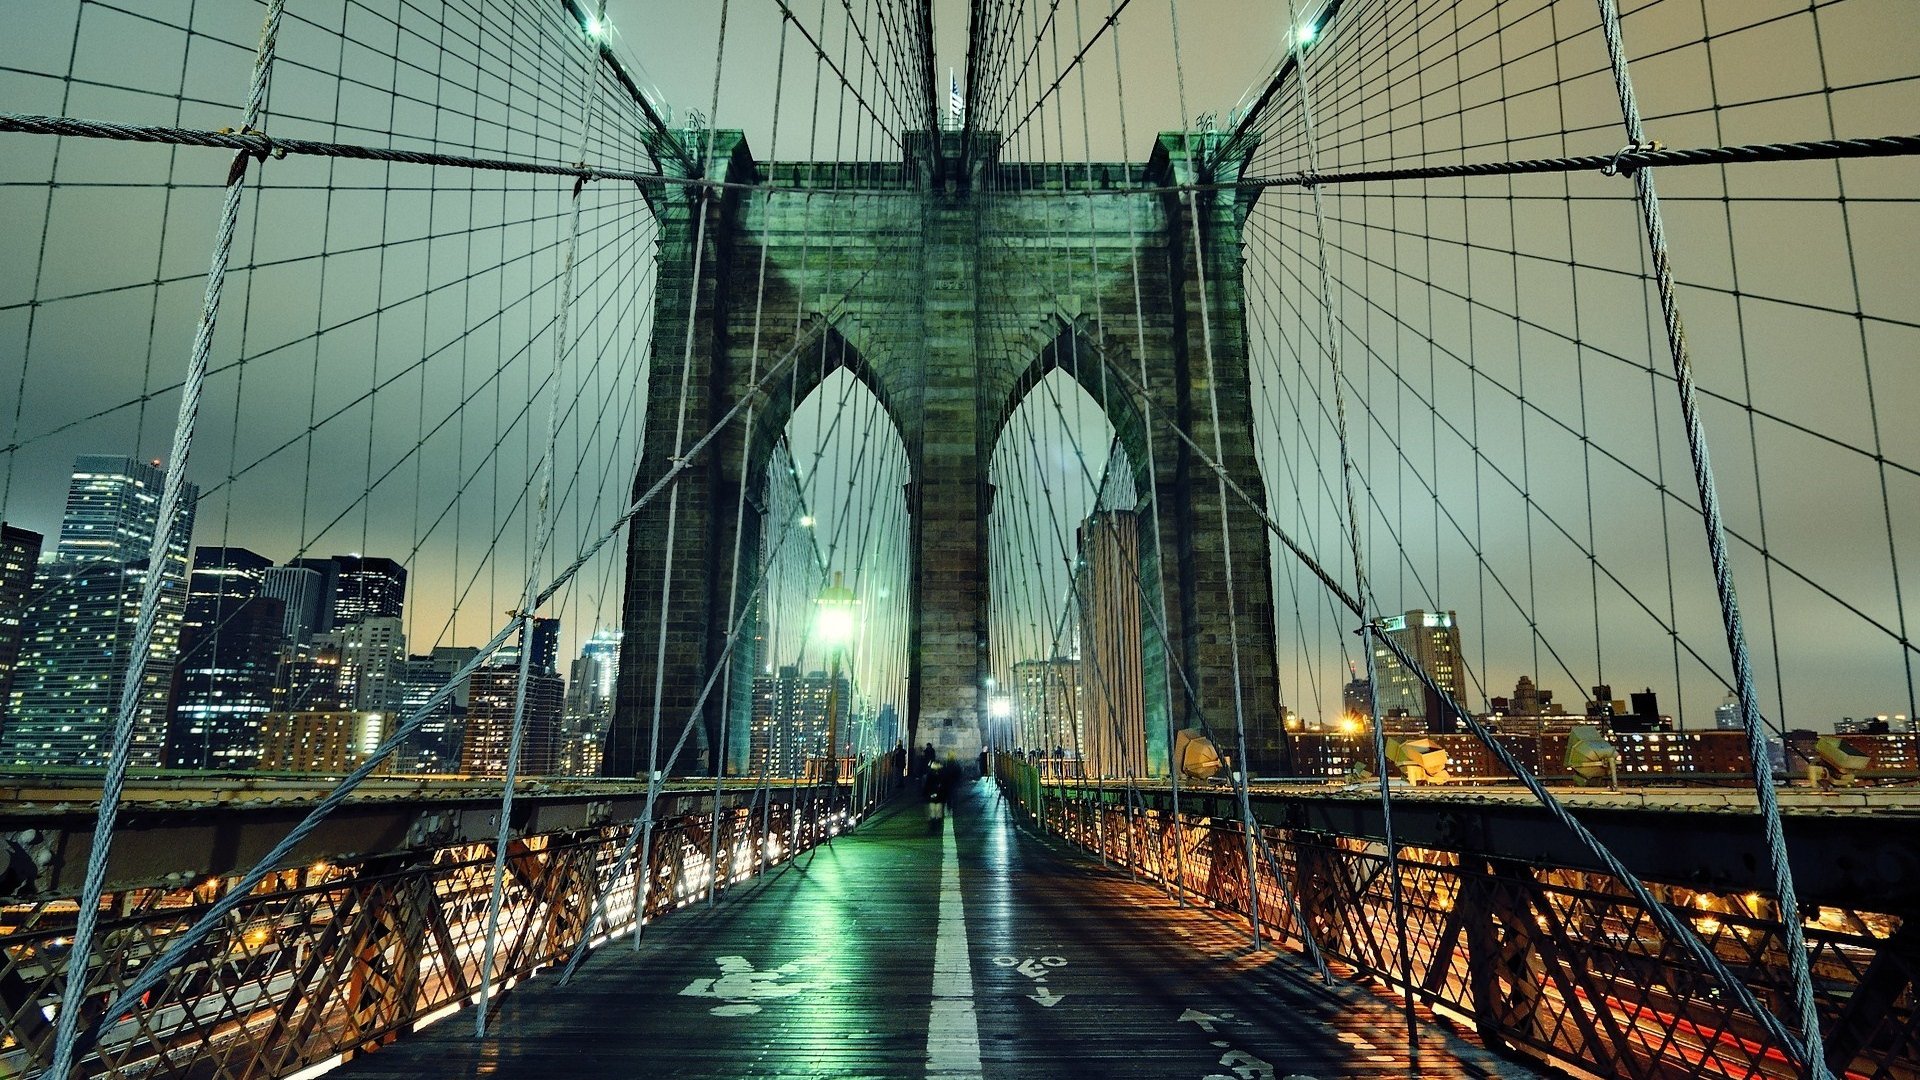 Brooklyn Bridge Wallpapers and Background Images   stmednet